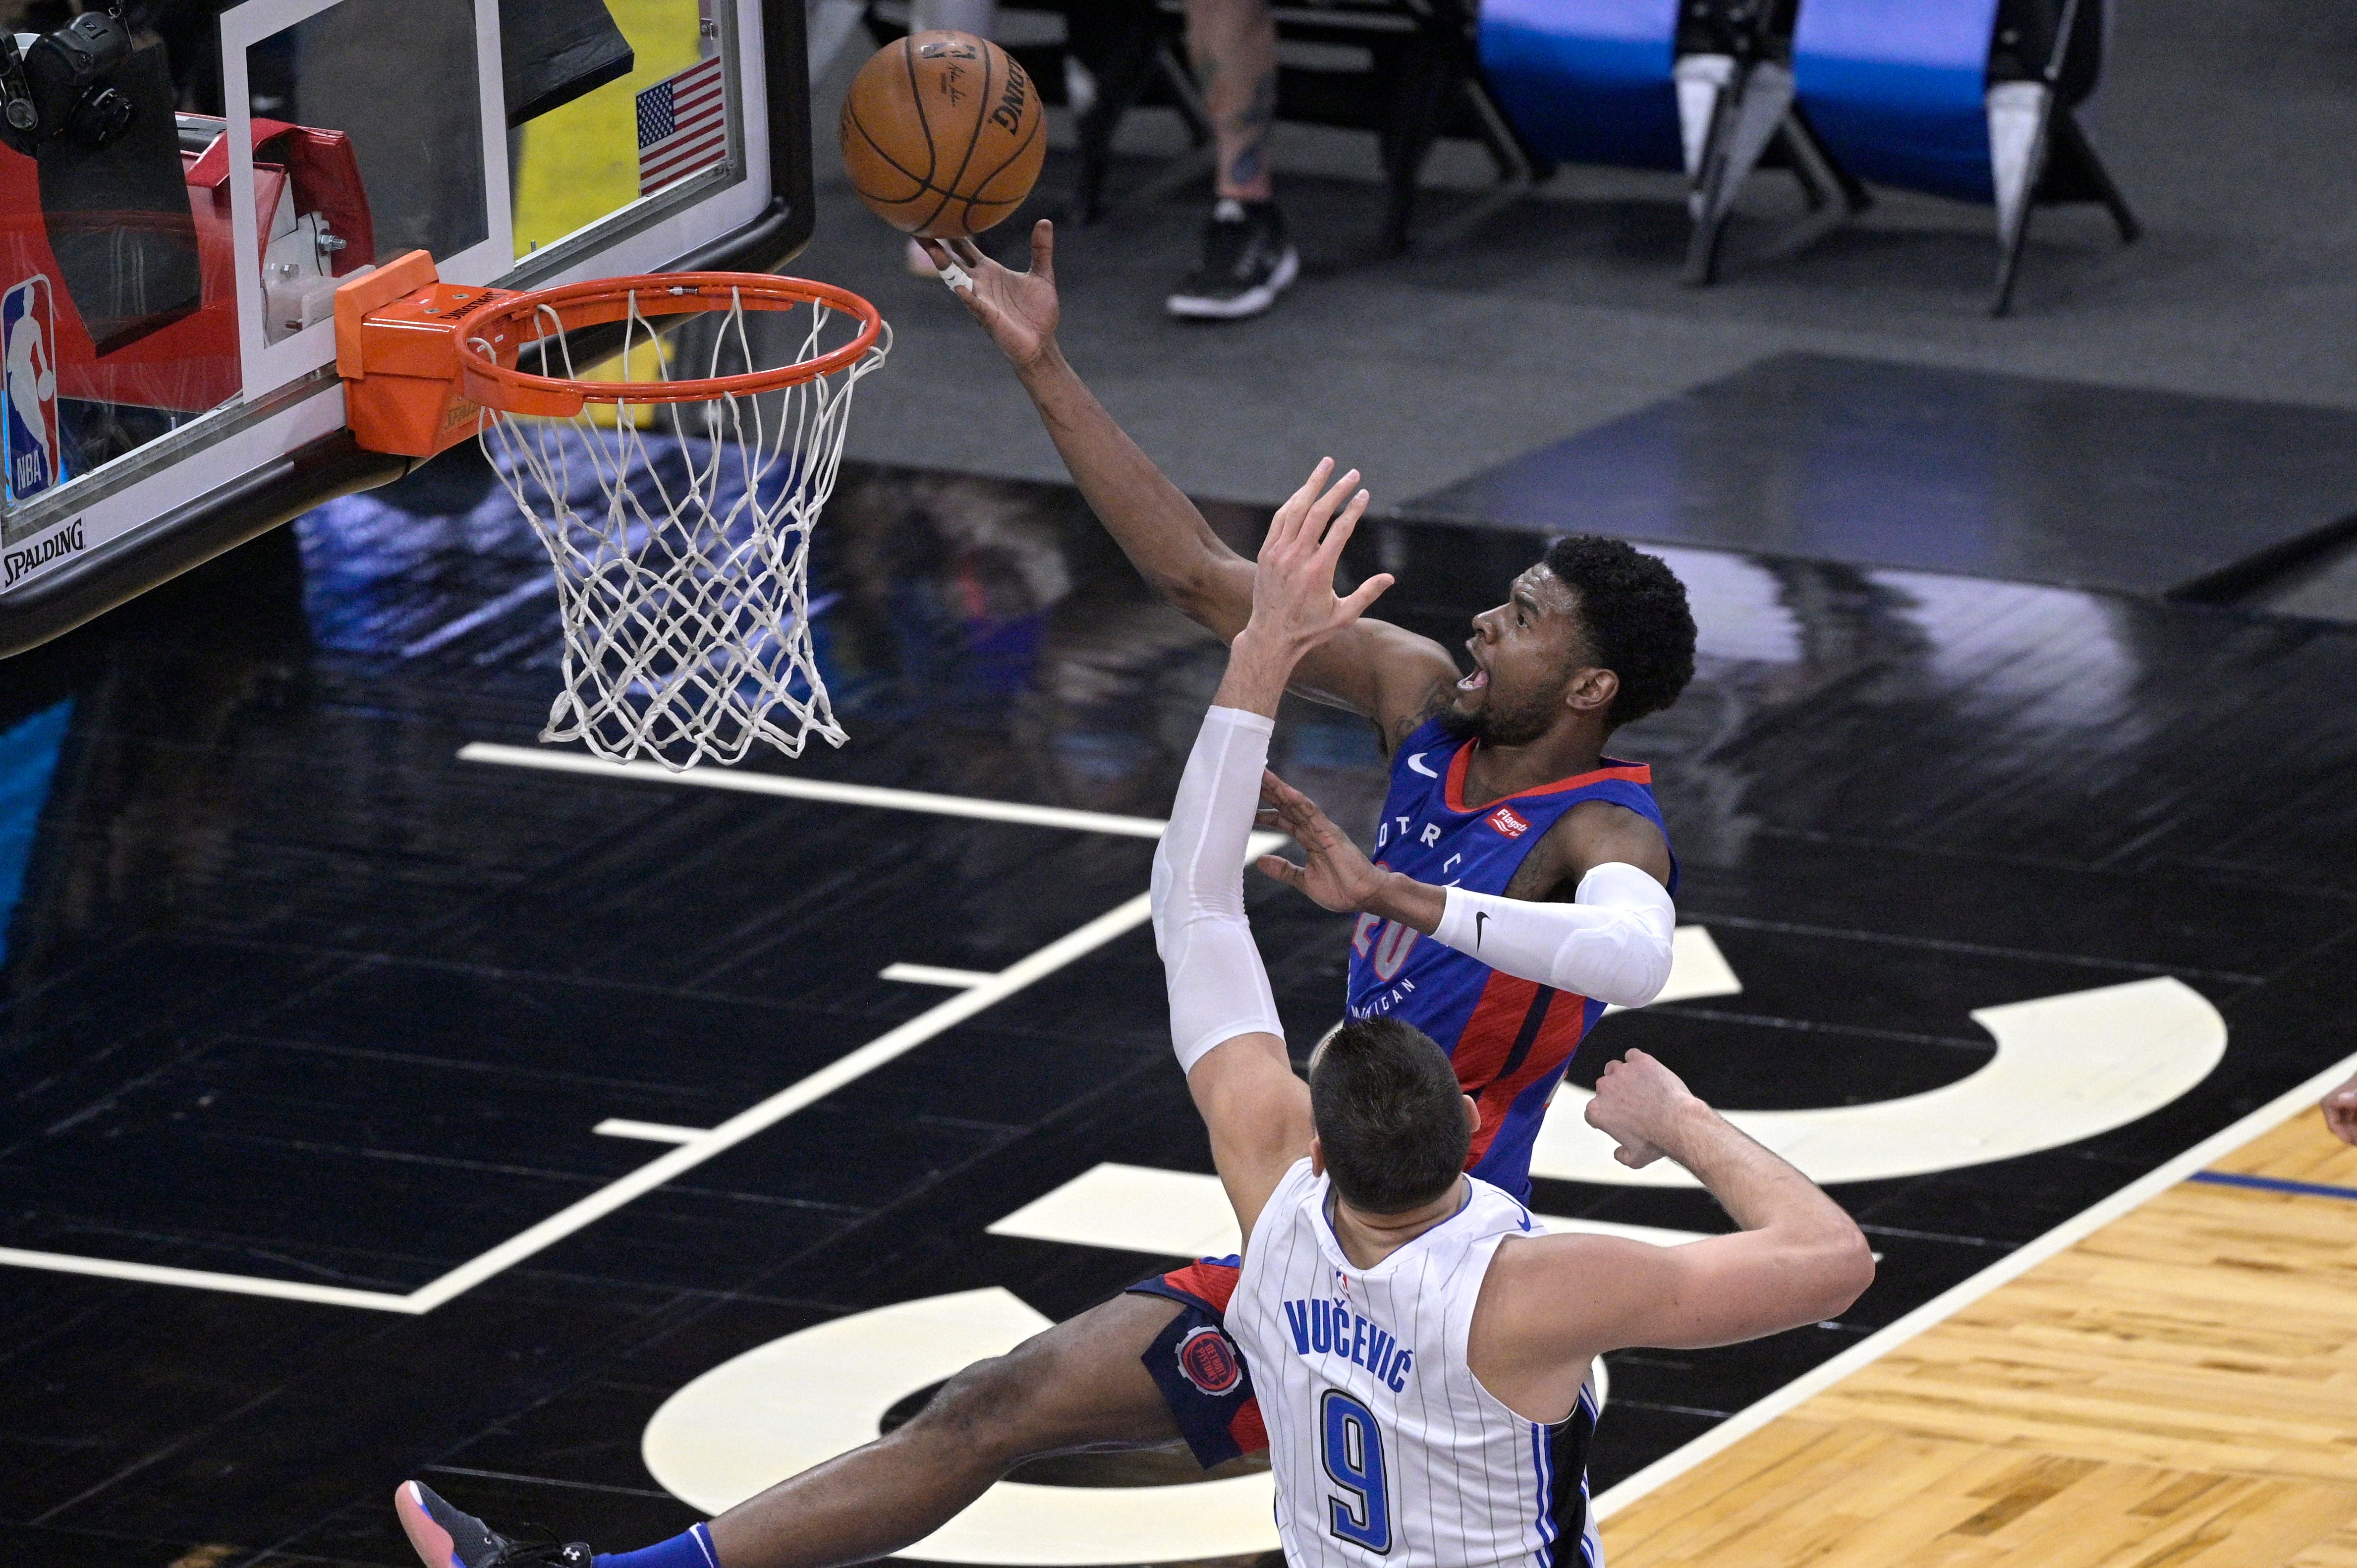 Detroit Pistons guard Josh Jackson (20) goes up for a shot in front of Orlando Magic center Nikola Vucevic (9) during the second half of an NBA basketball game.